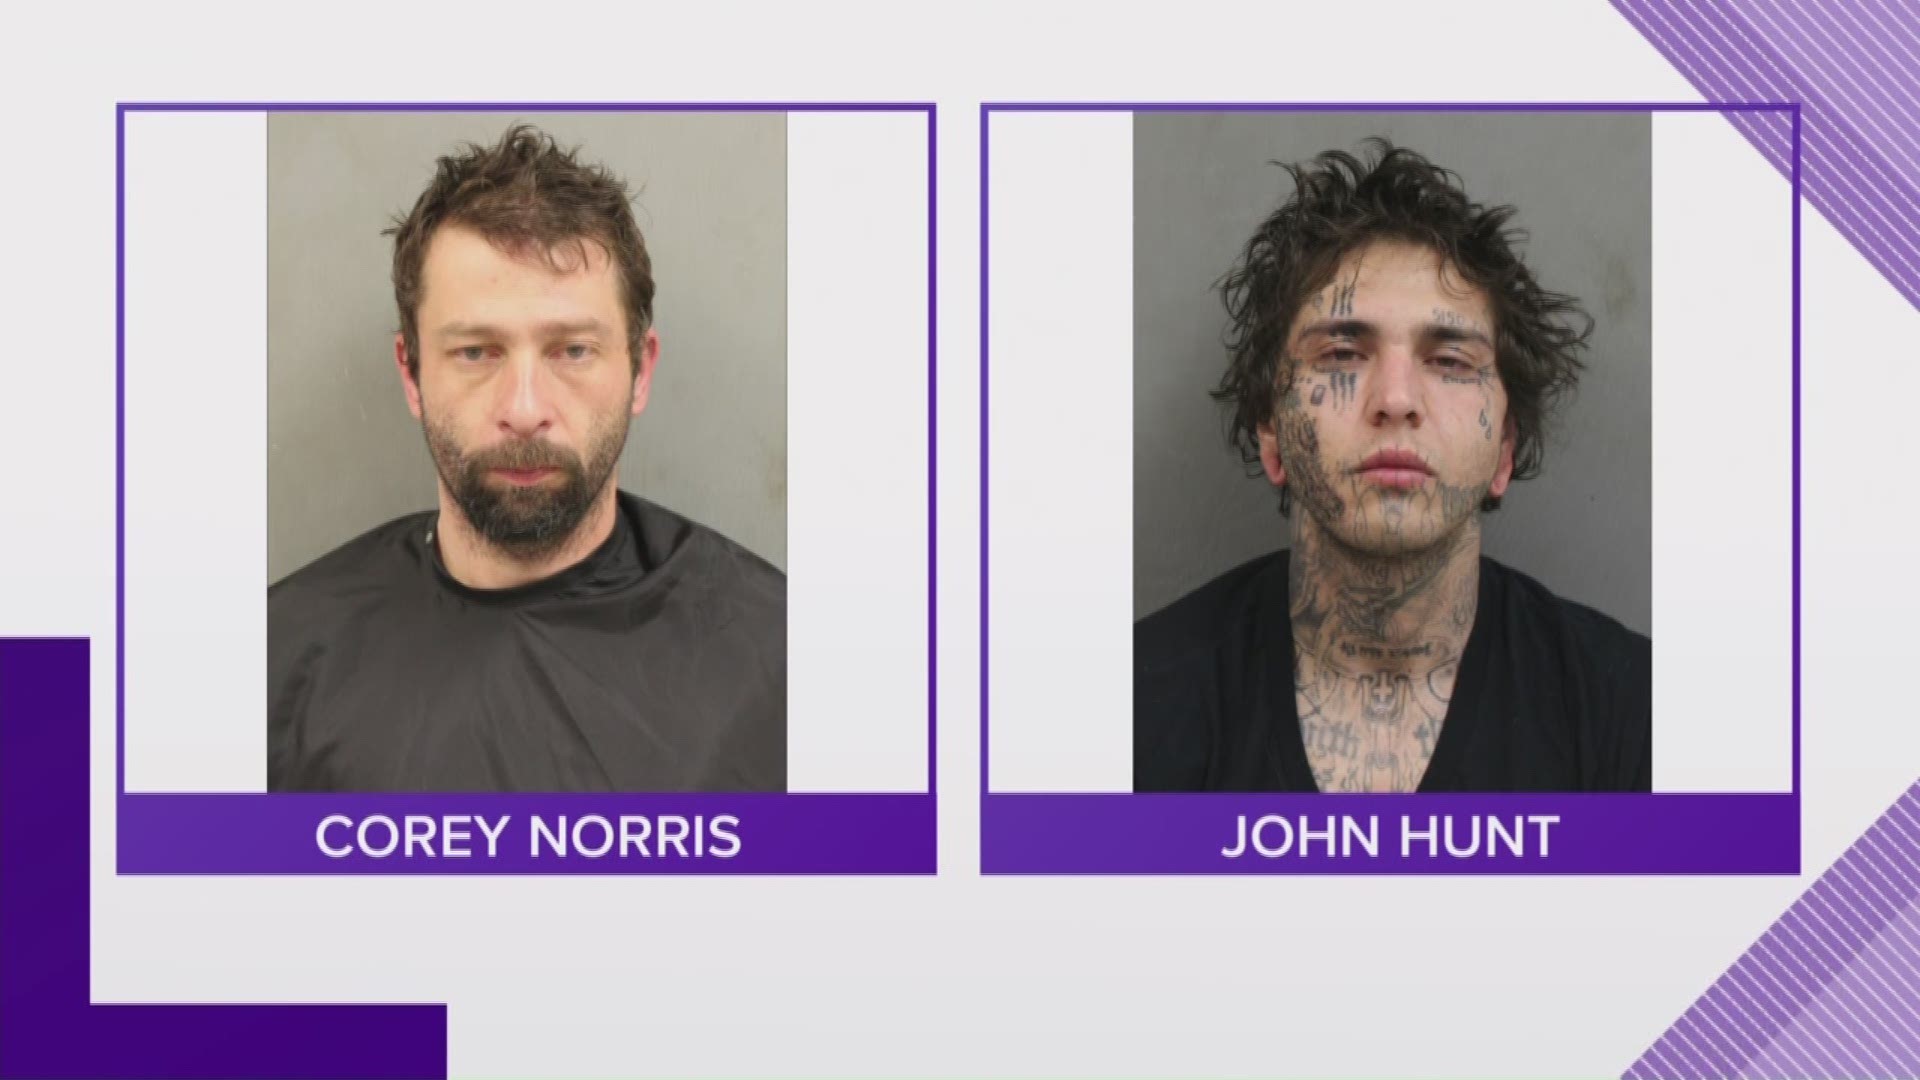 Kershaw County deputies say a routine traffic stop resulted in the arrest of two convicted felons and the seizure of drugs and guns.